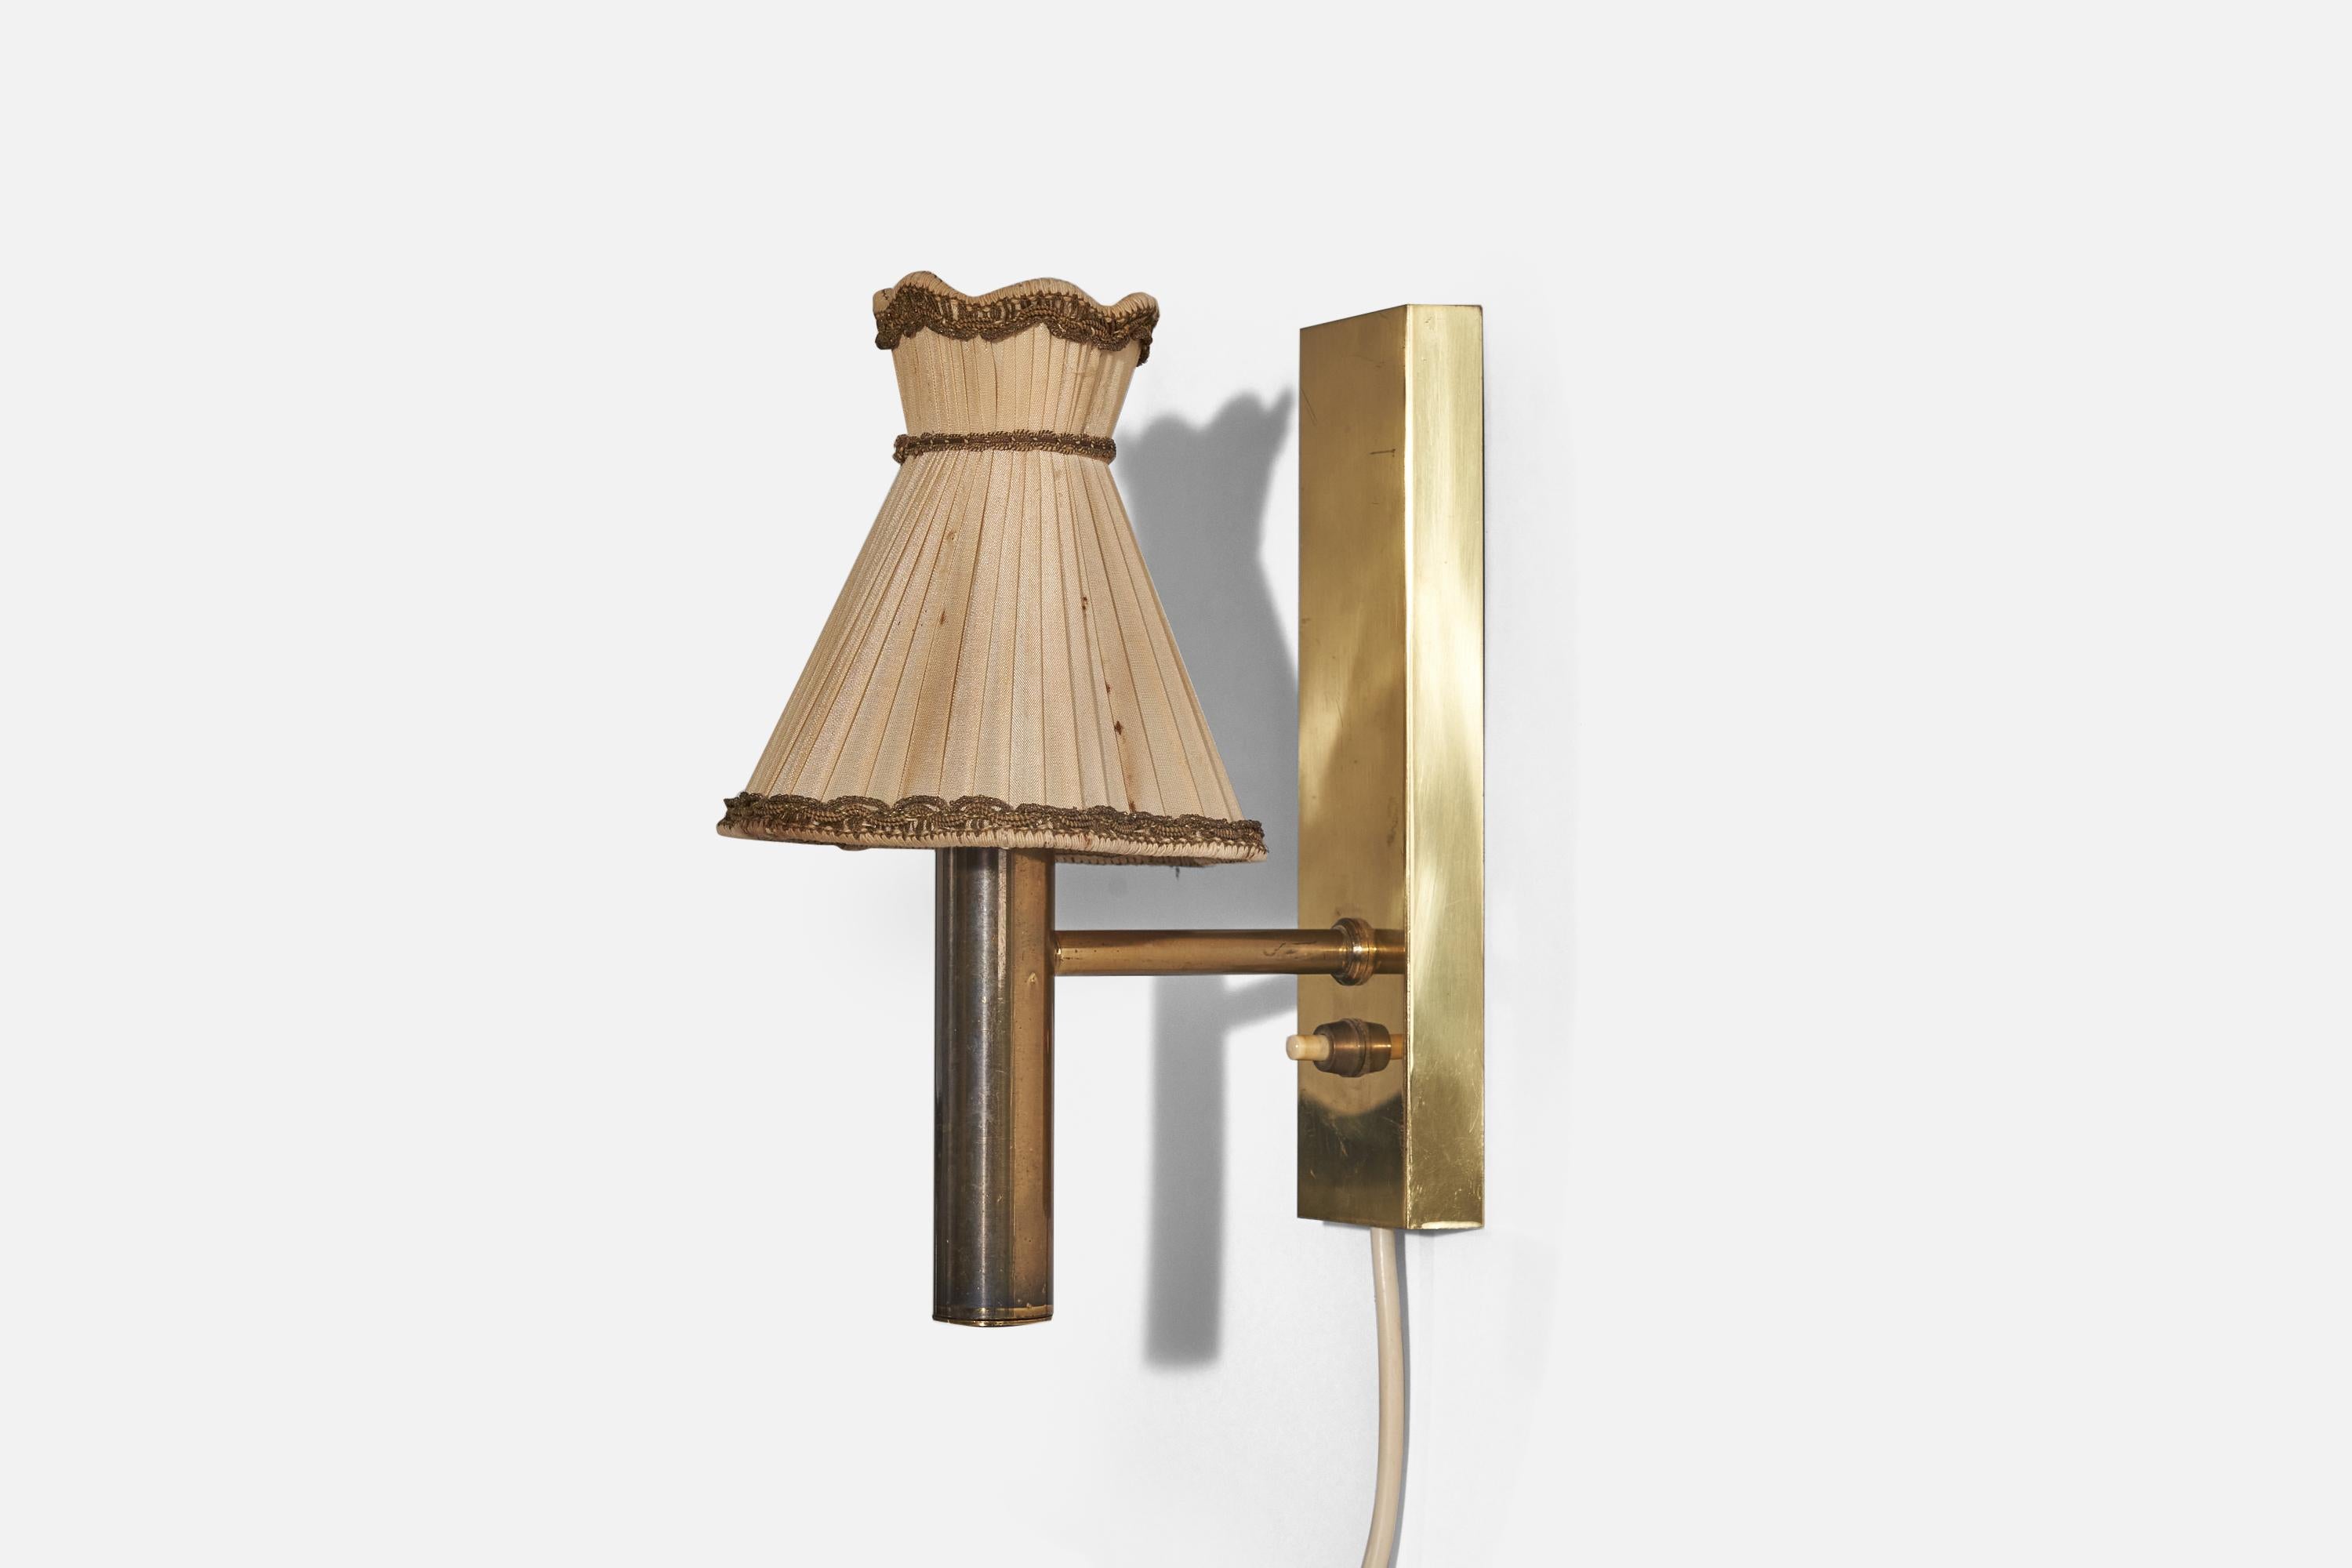 Mid-20th Century Svend Mejlstrøm, Wall Lights, Brass, Fabric, Norway, c. 1960s For Sale